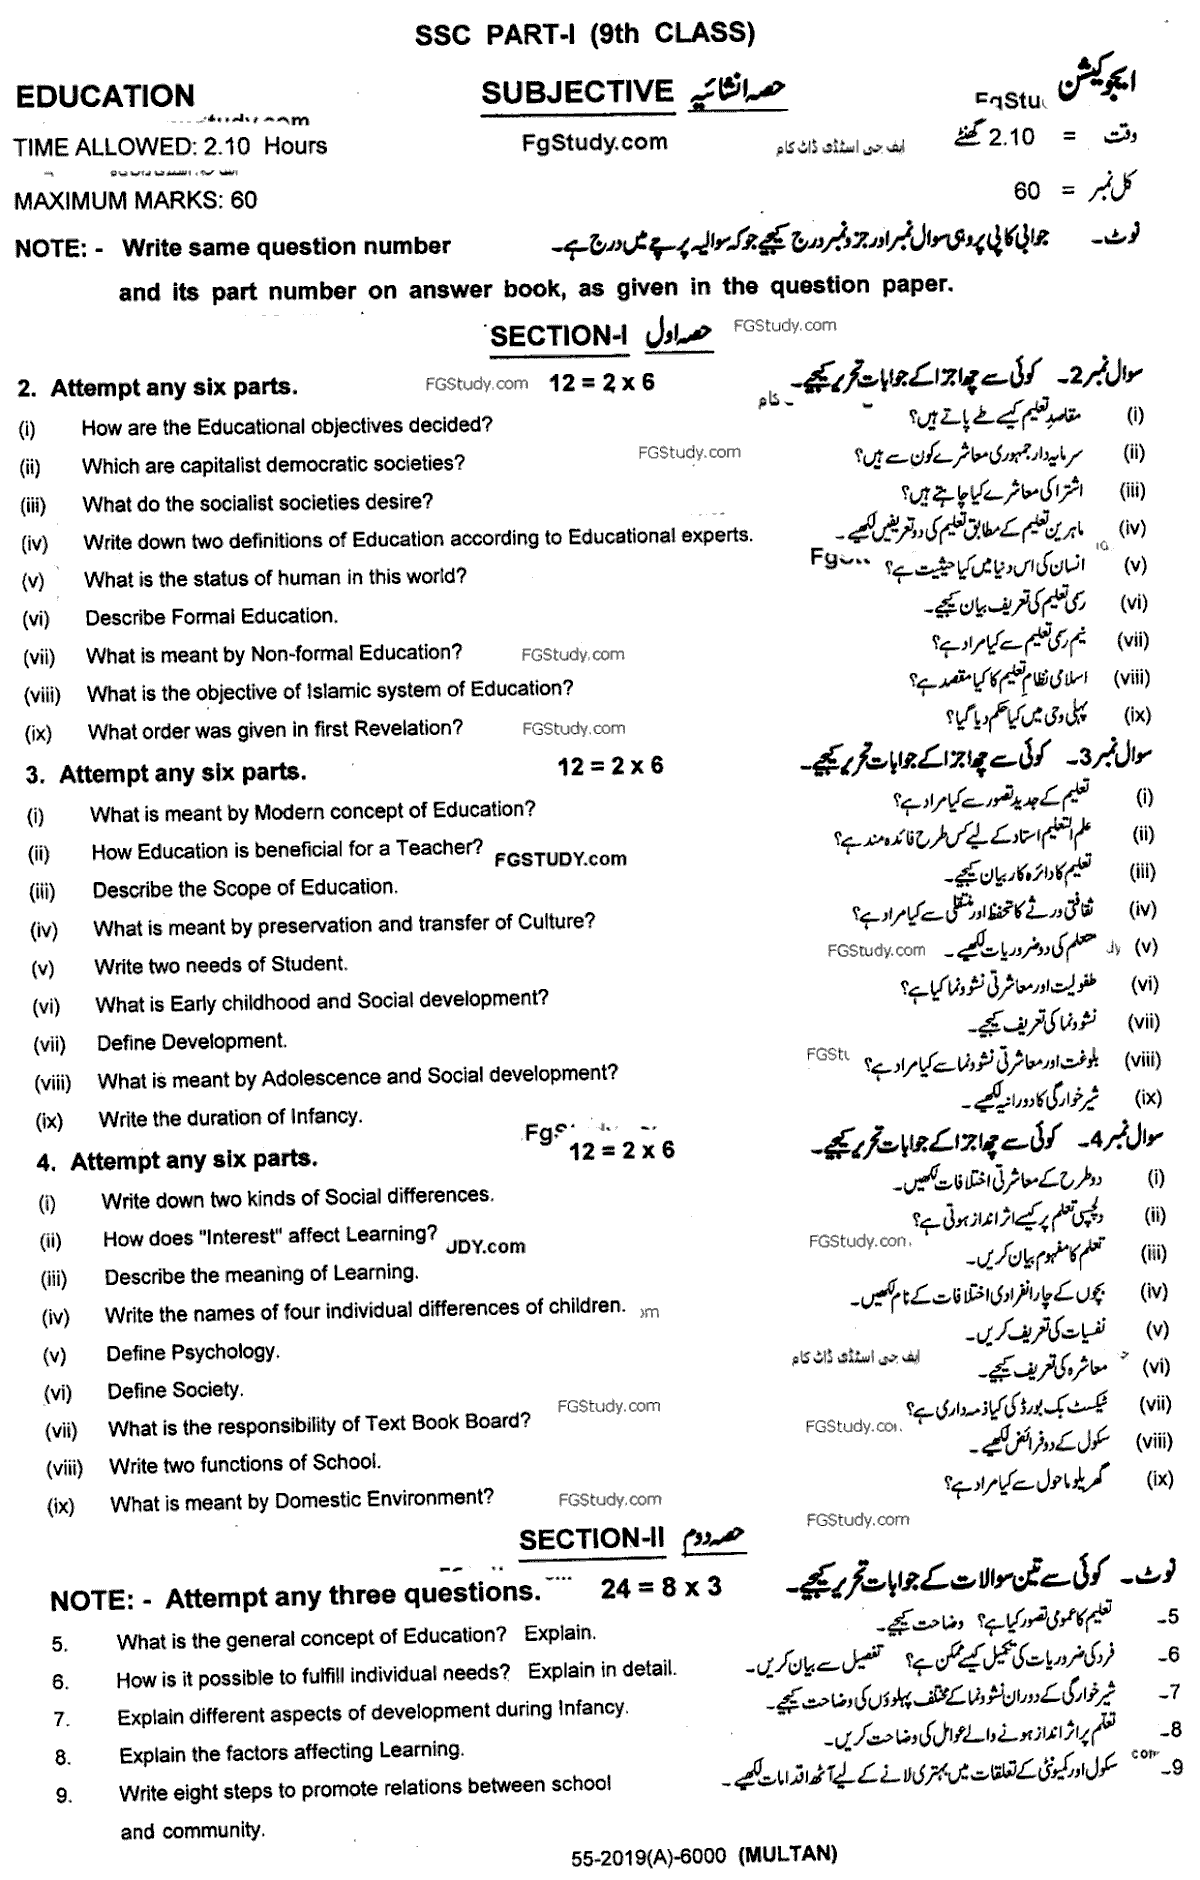 9th Class Education Past Paper 2019 Group 1 Subjective Multan Board